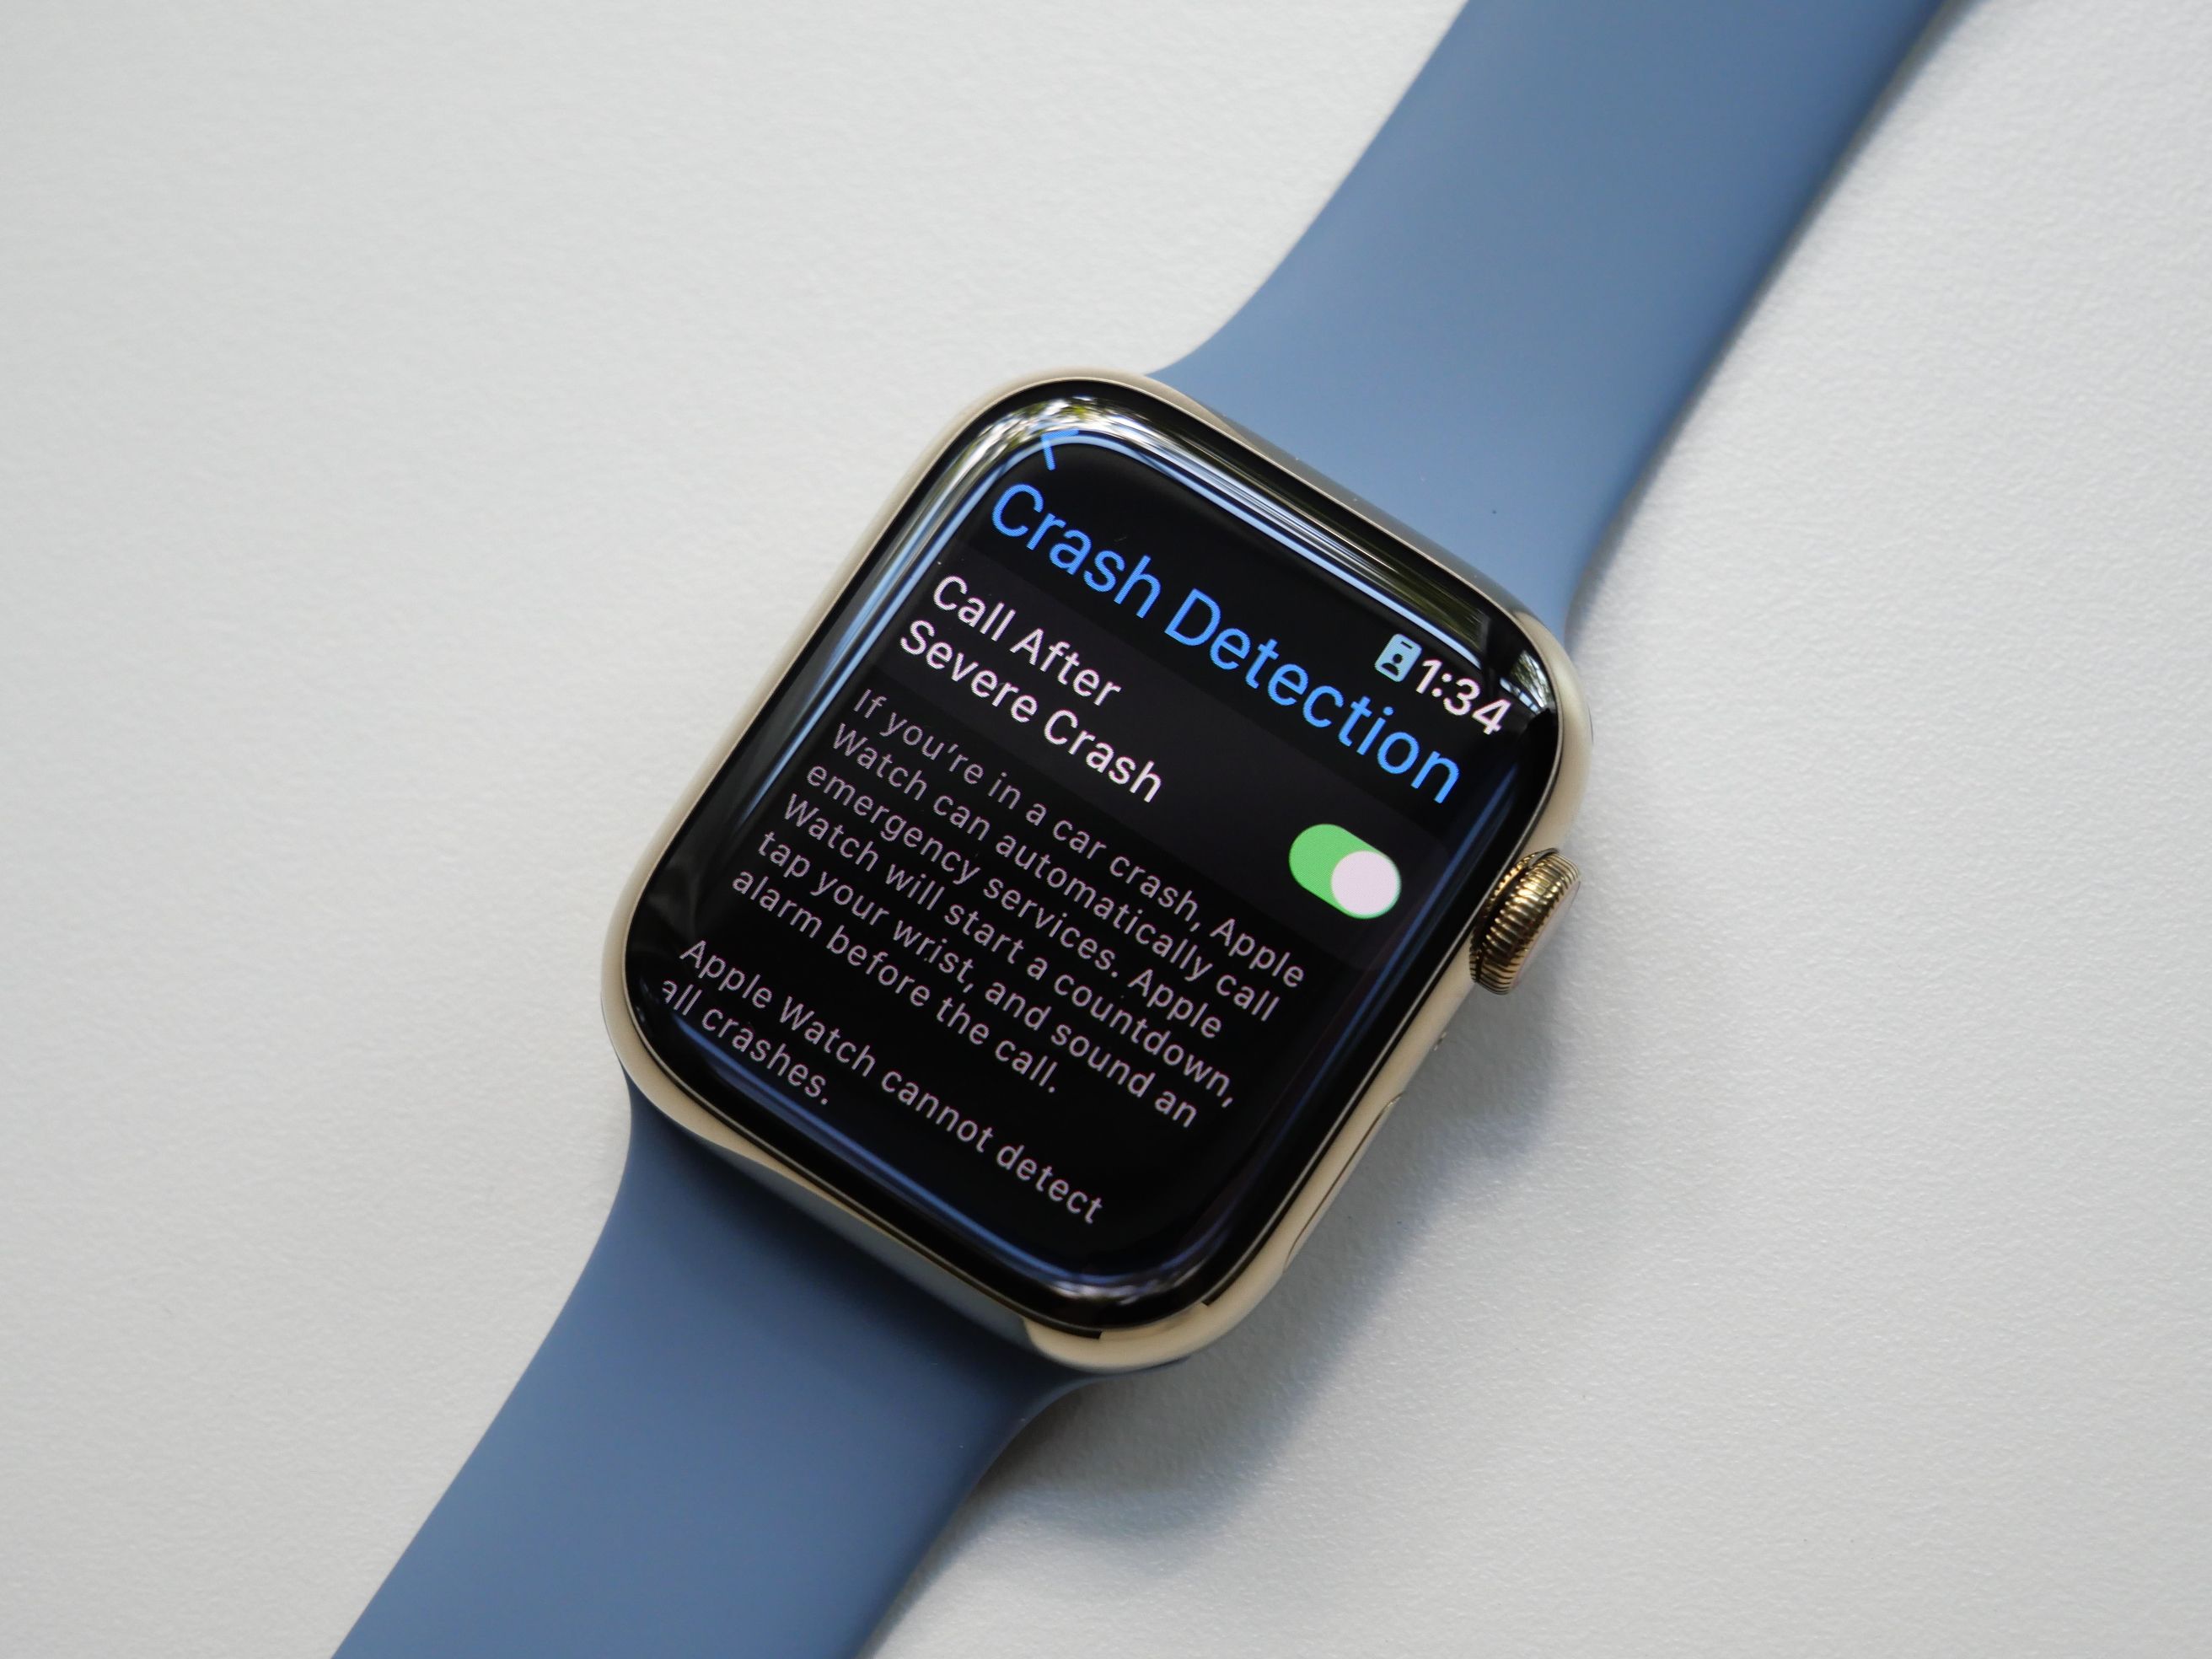 Apple Watch Crash Detection Settings Page